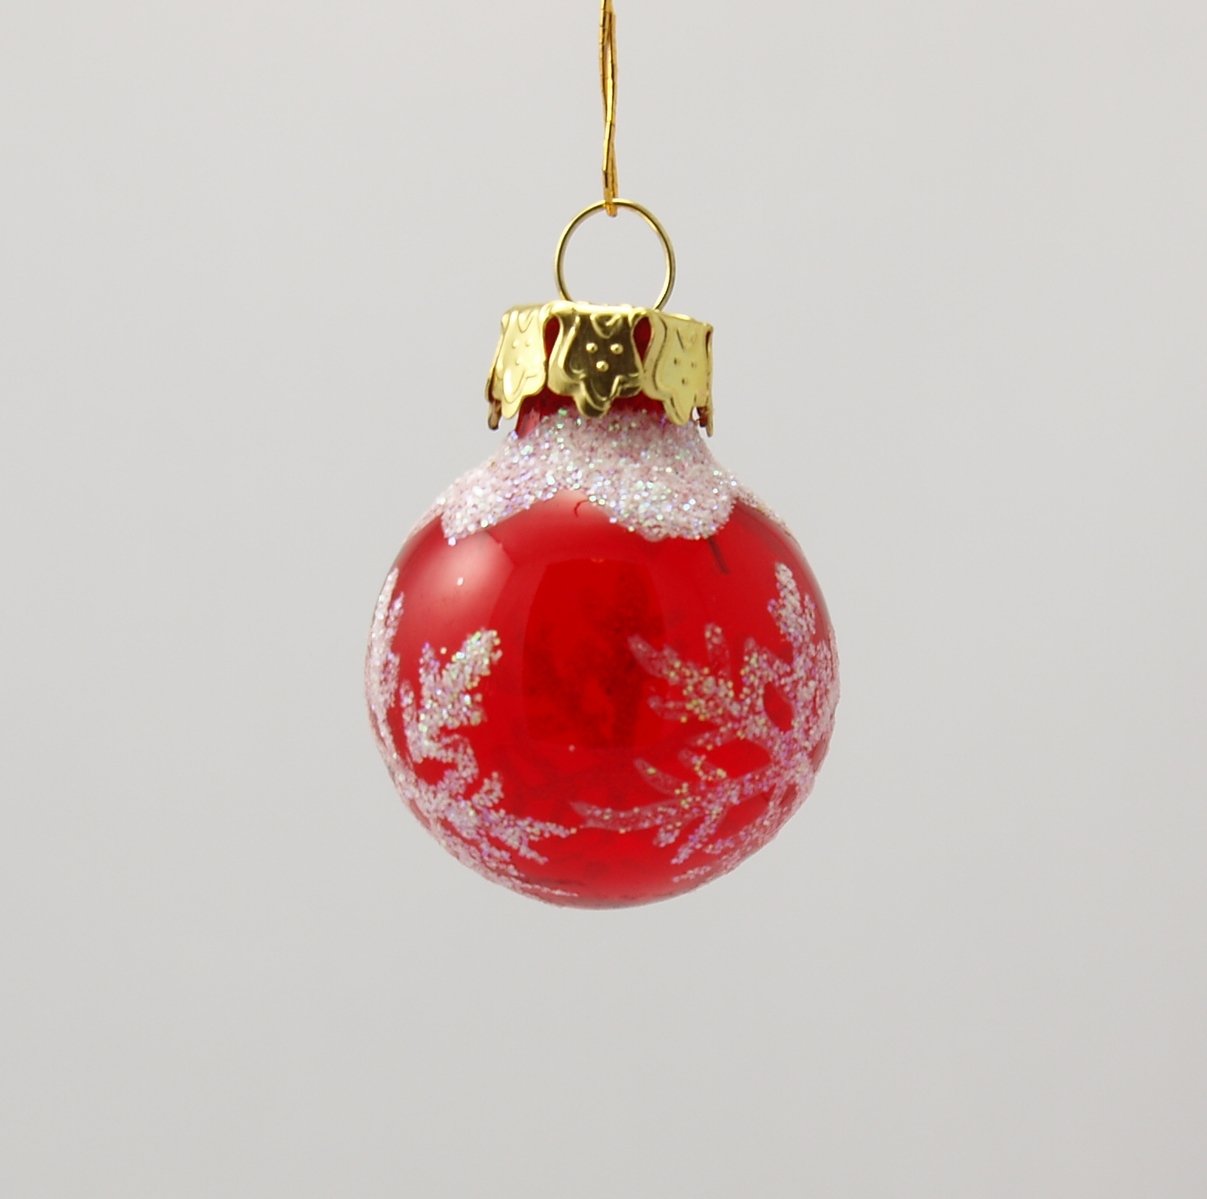 a red and white ornament hanging on a hook